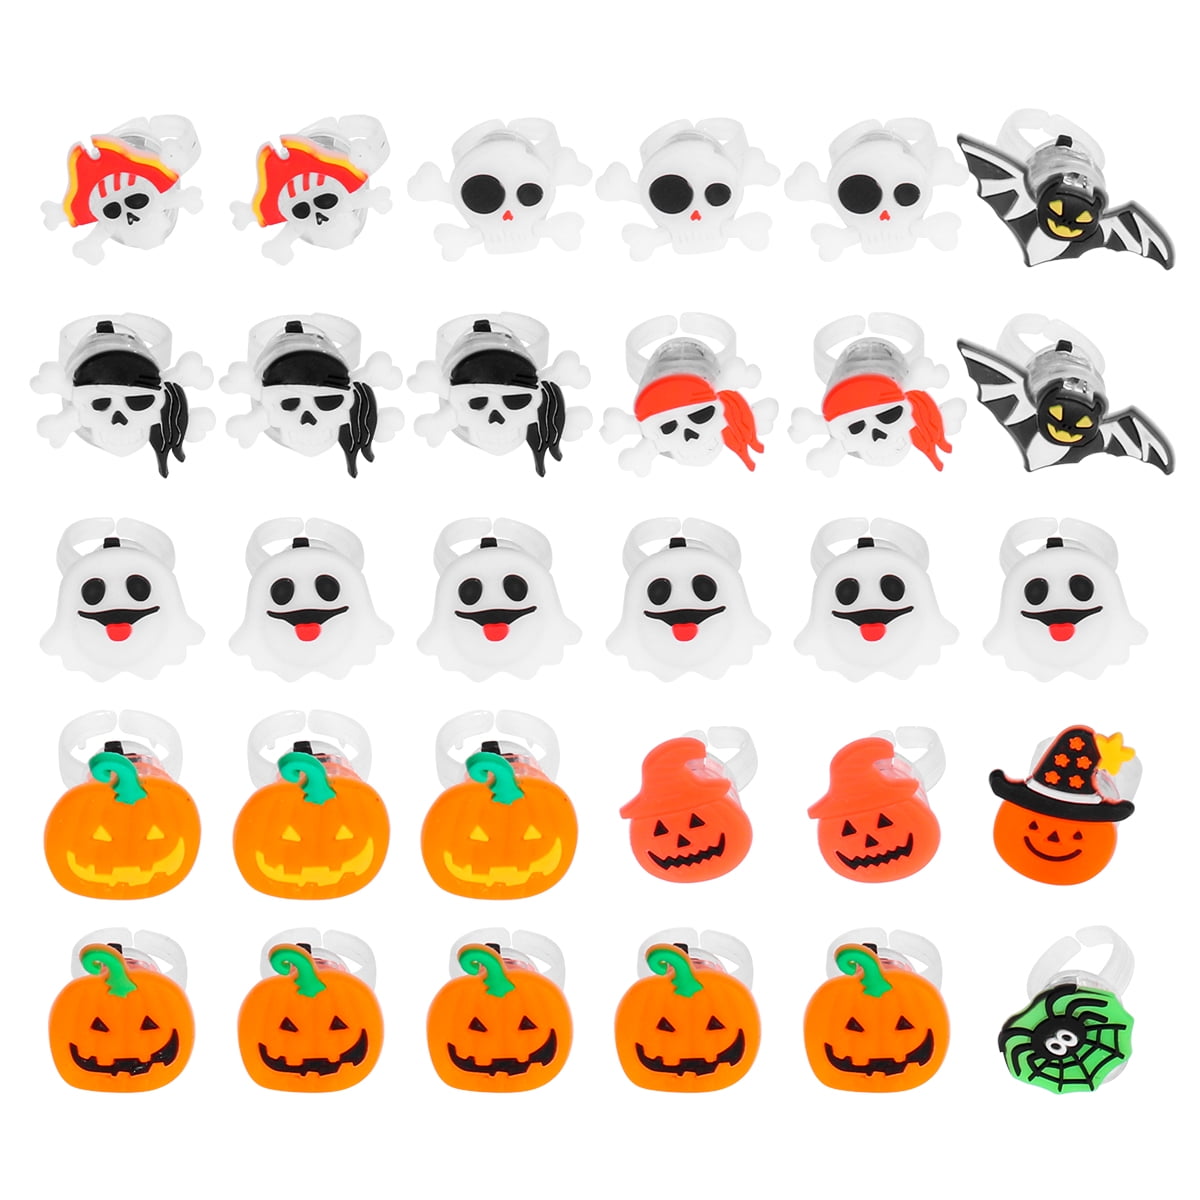 TOYMYTOY 30pcs Halloween LED Fingerrings Light Up Rings Toys Party Favors for Kids and Adults Random Style 